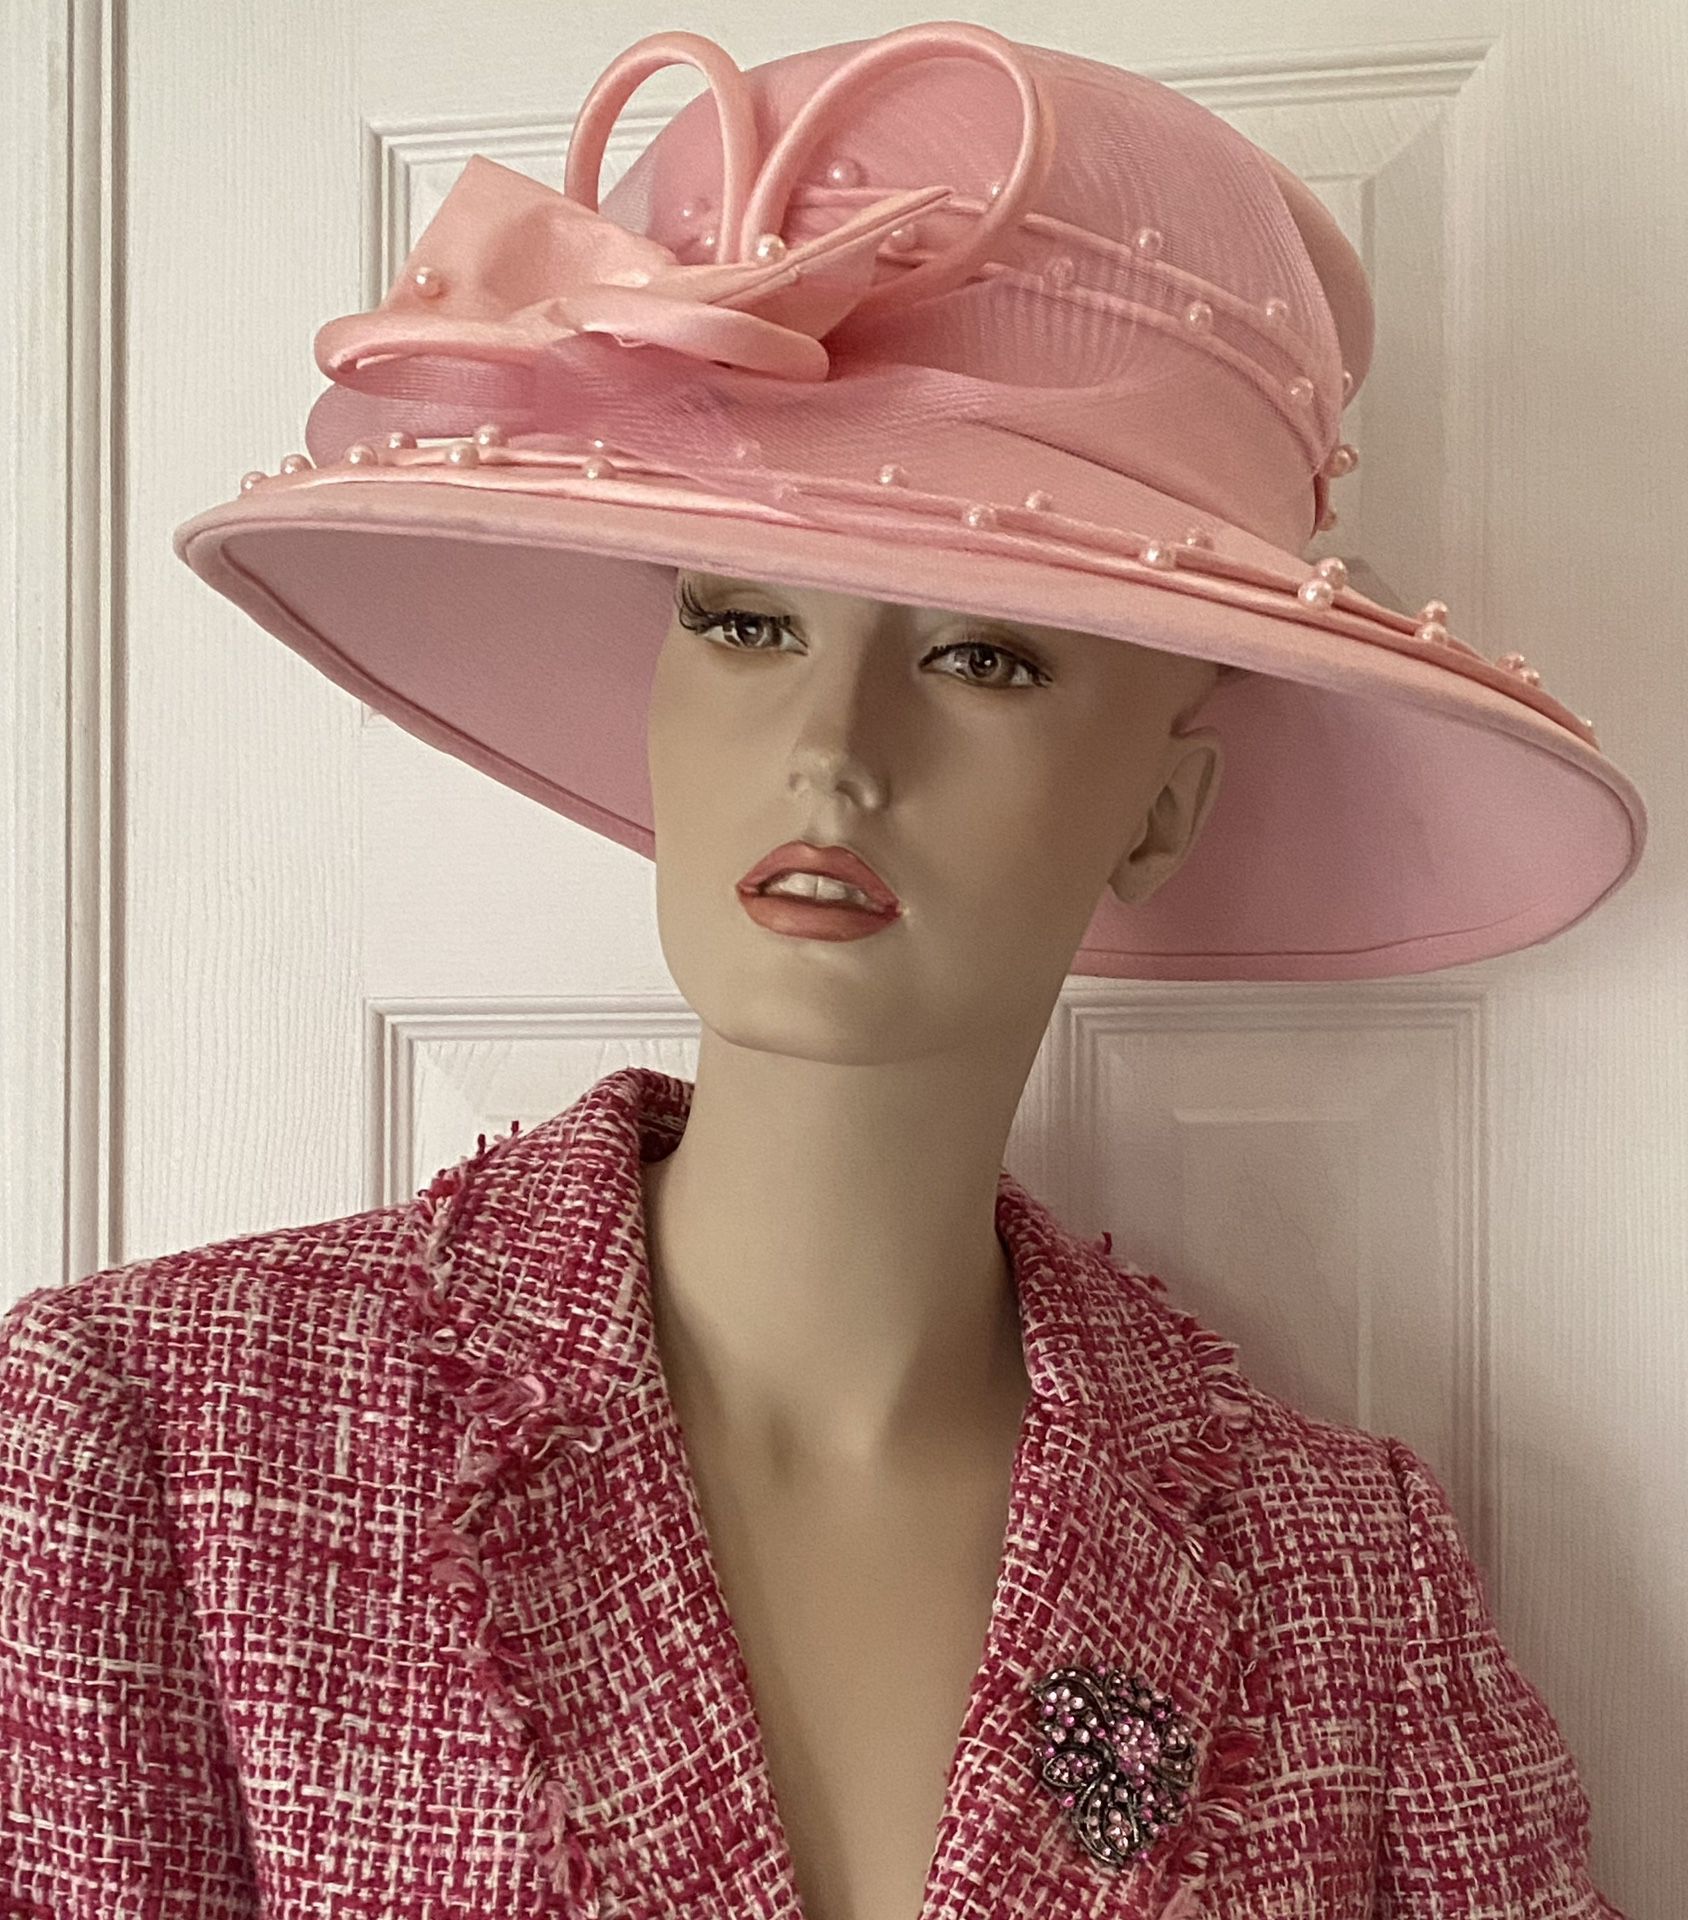 HAT CHURCH HAT – ML STUDIO PINK WIDE BRIM HAT WITH BEADS AND BOW DESIGNER HAT – MOTHER’S DAY GIFT CHURCH HAT